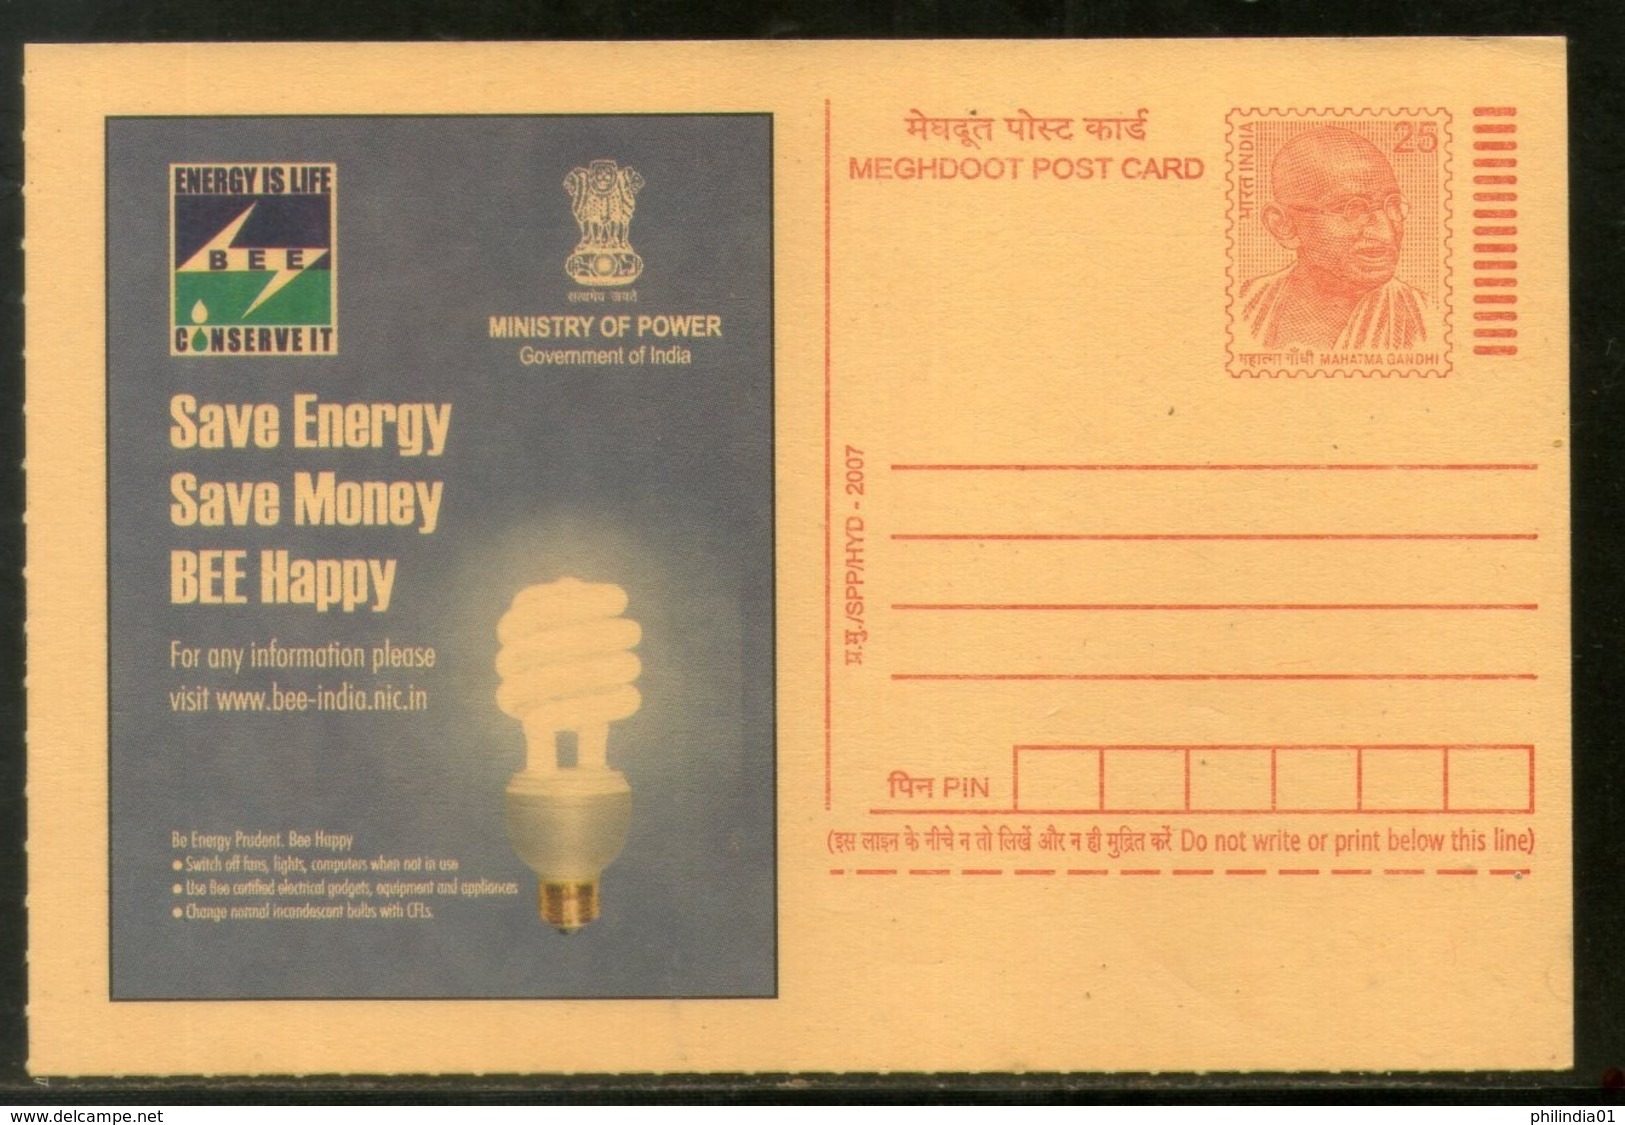 India 2007 Save Energy Electricity CFL Bulb Science Power Gandhi Post Card # 315 - Electricity